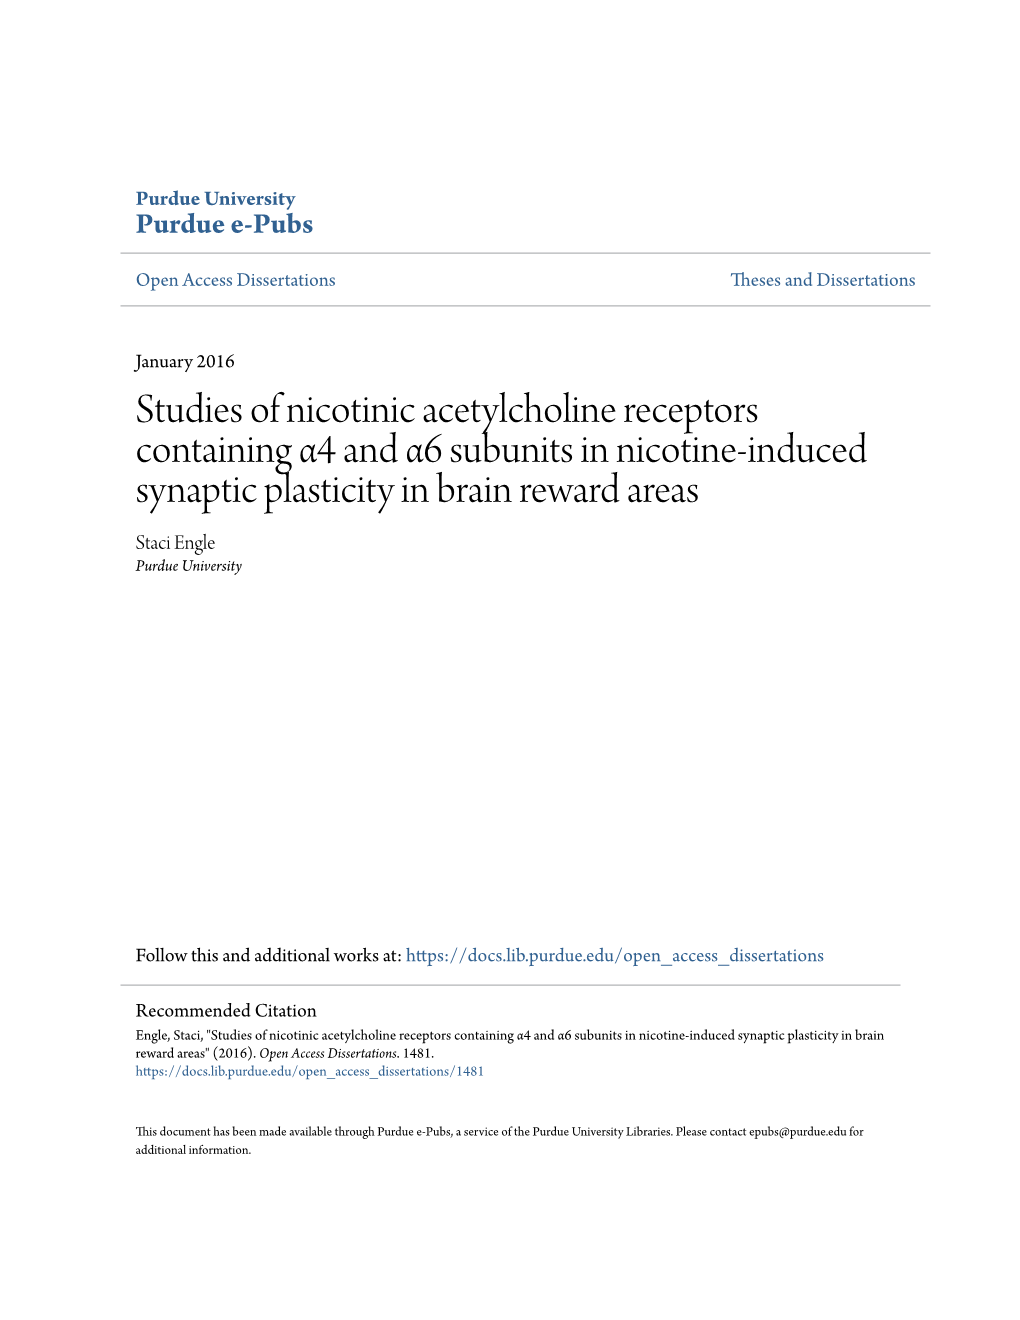 Studies of Nicotinic Acetylcholine Receptors Containing Α4 and Α6 Subunits in Nicotine-Induced Synaptic Plasticity in Brain Reward Areas Staci Engle Purdue University